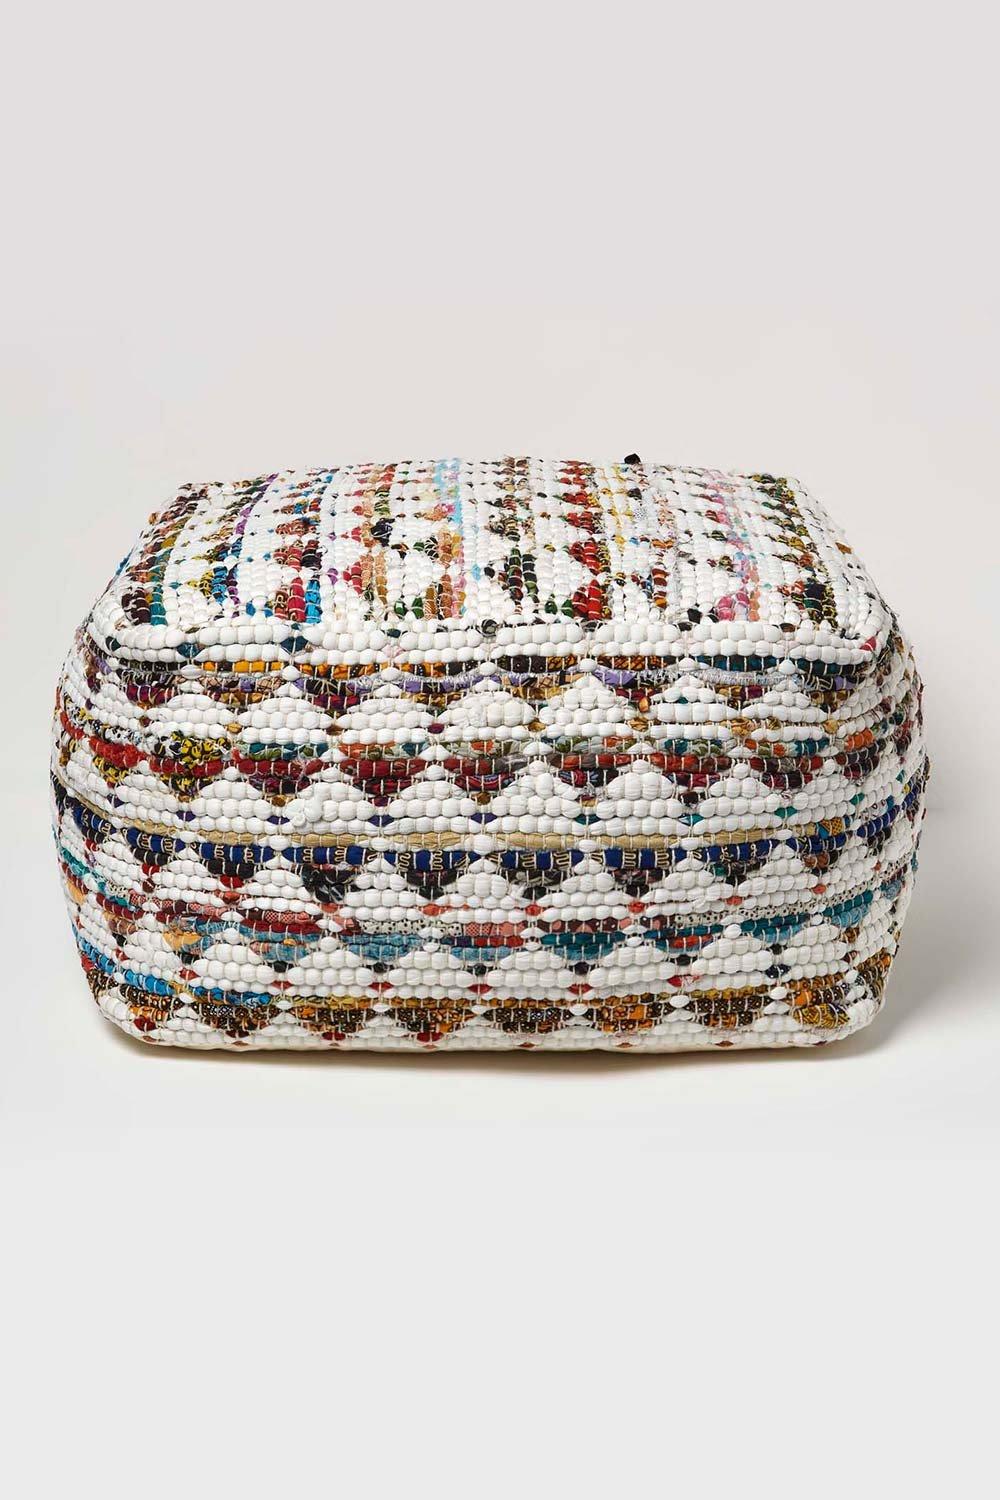 Homescapes Chindi Design Bean Filled Pouffe Large|cream